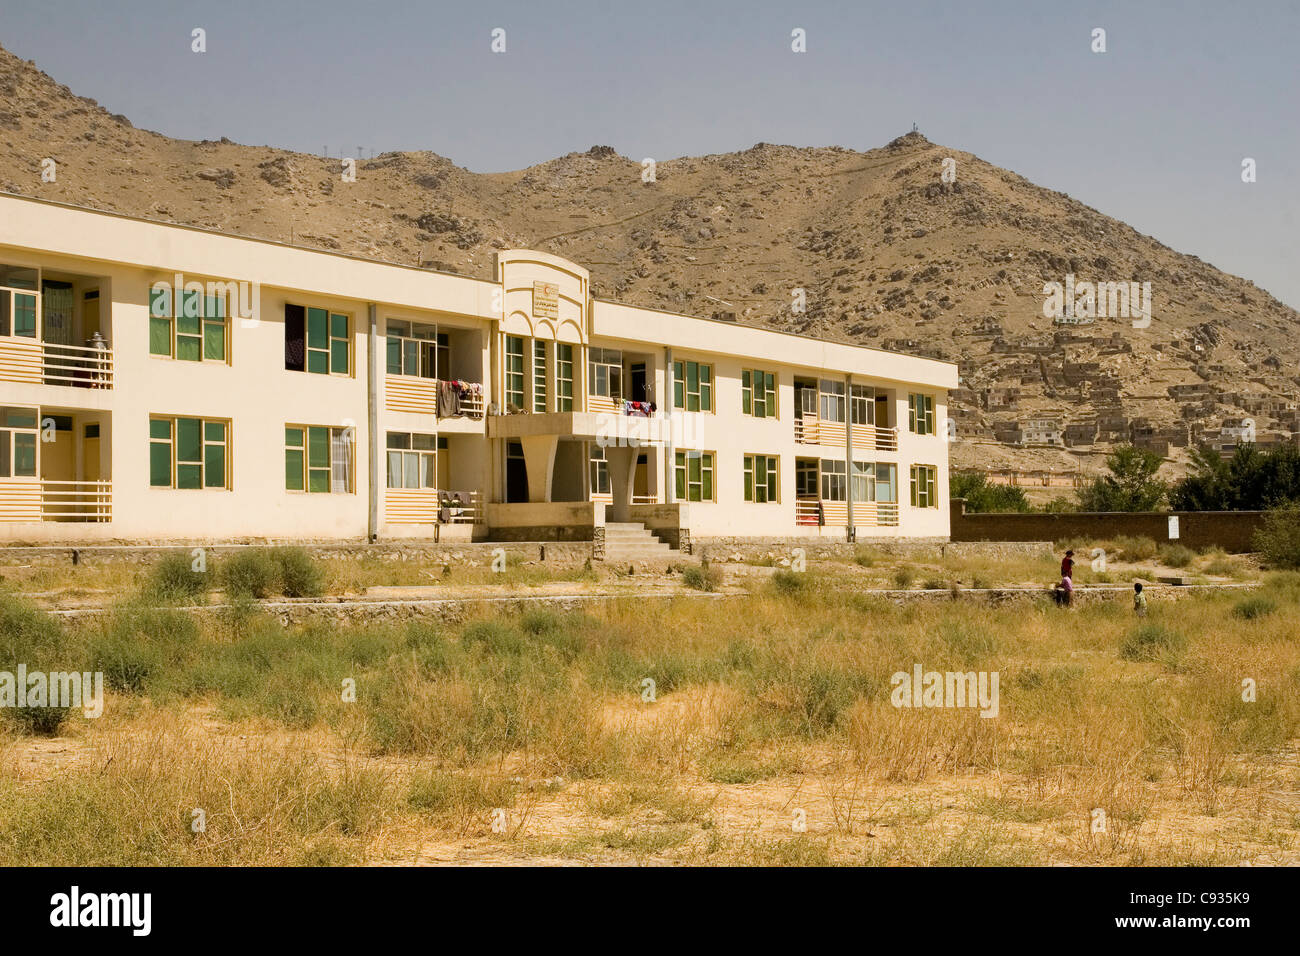 Red Crescent housing development in Kabul Afghanistan Stock Photo